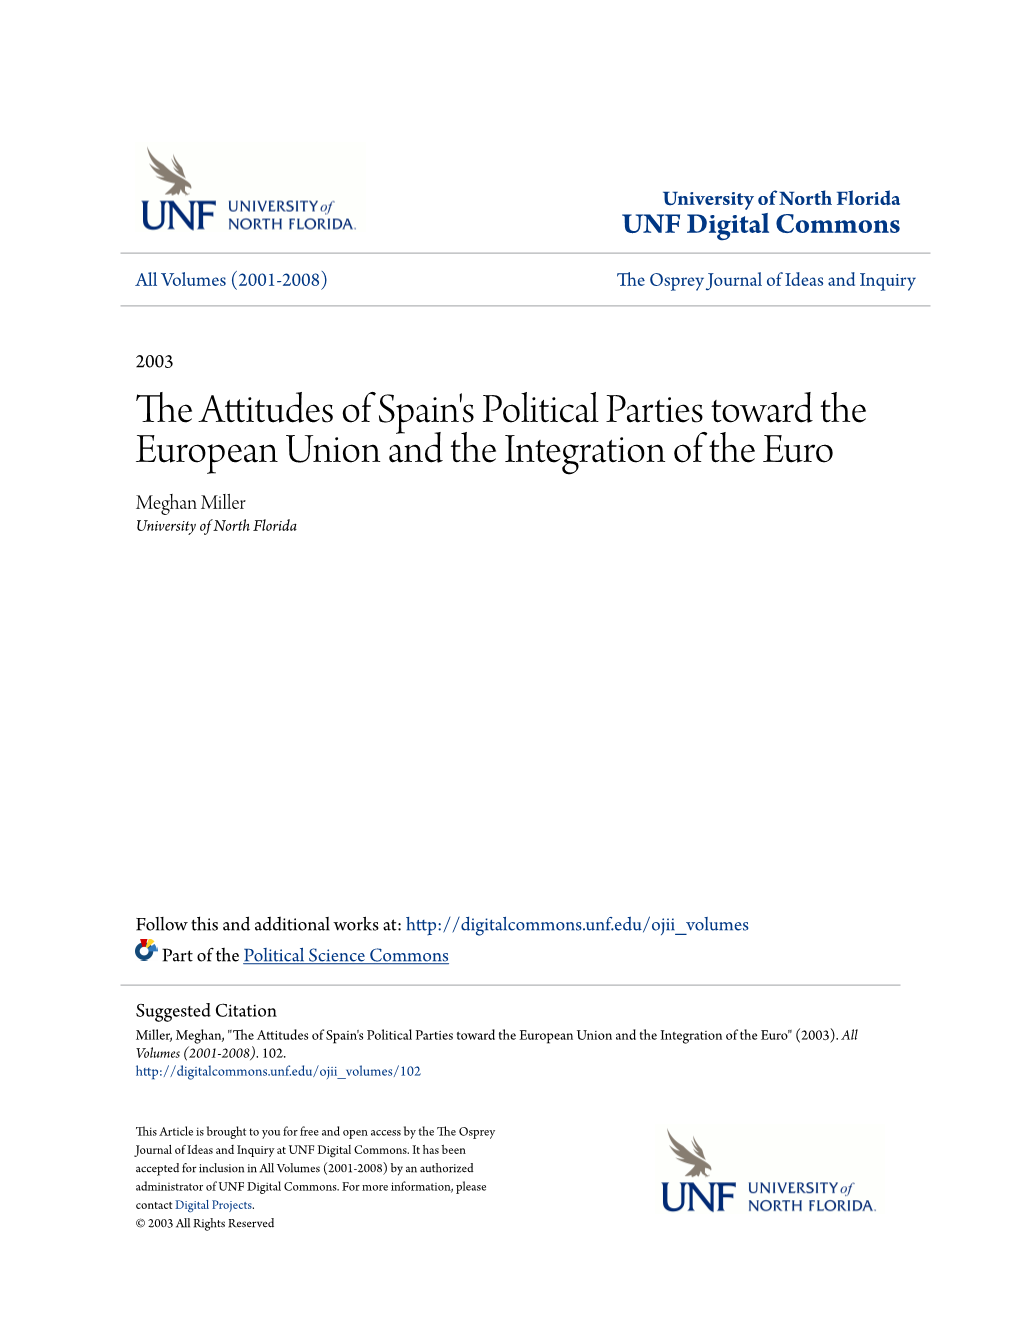 The Attitudes of Spain's Political Parties Toward the European Union and the Integration of the Euro Meghan Miller University of North Florida